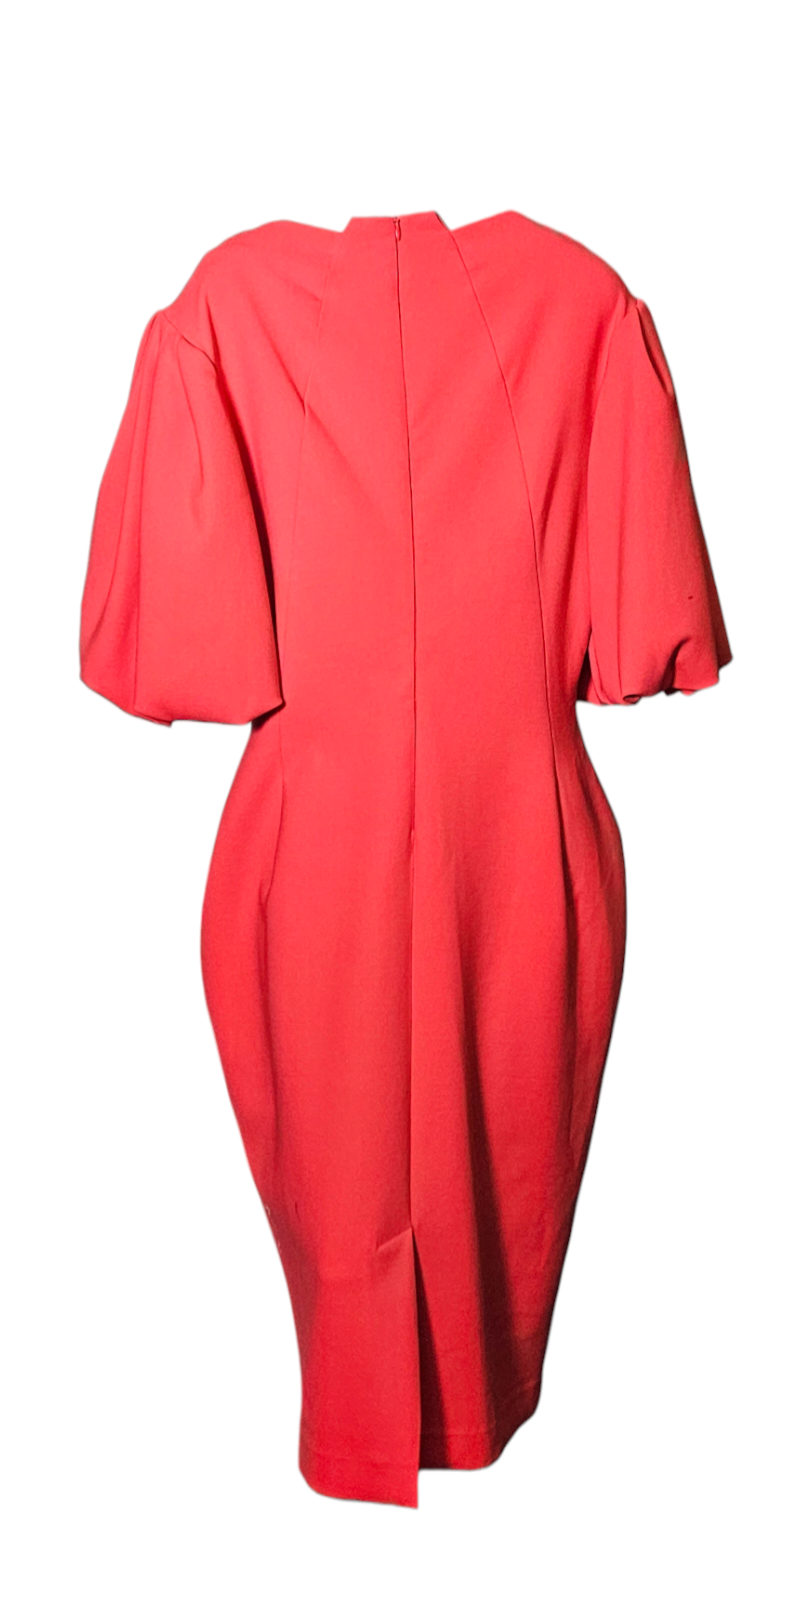 Center High-Neck Dress with Puffed Sleeves